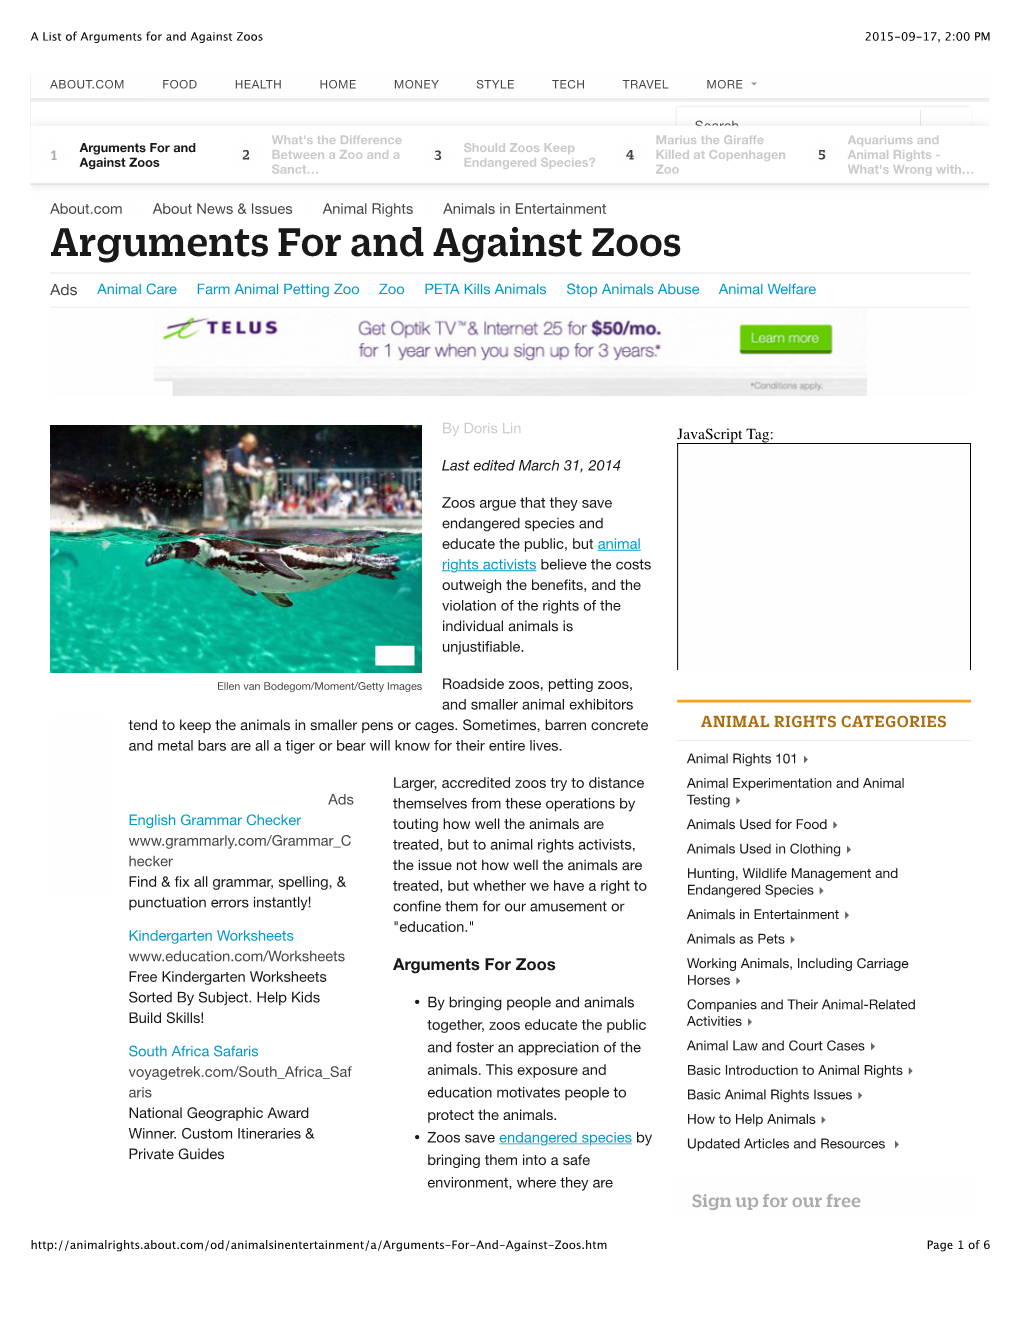 A List of Arguments for and Against Zoos 2015-09-17, 2:00 PM